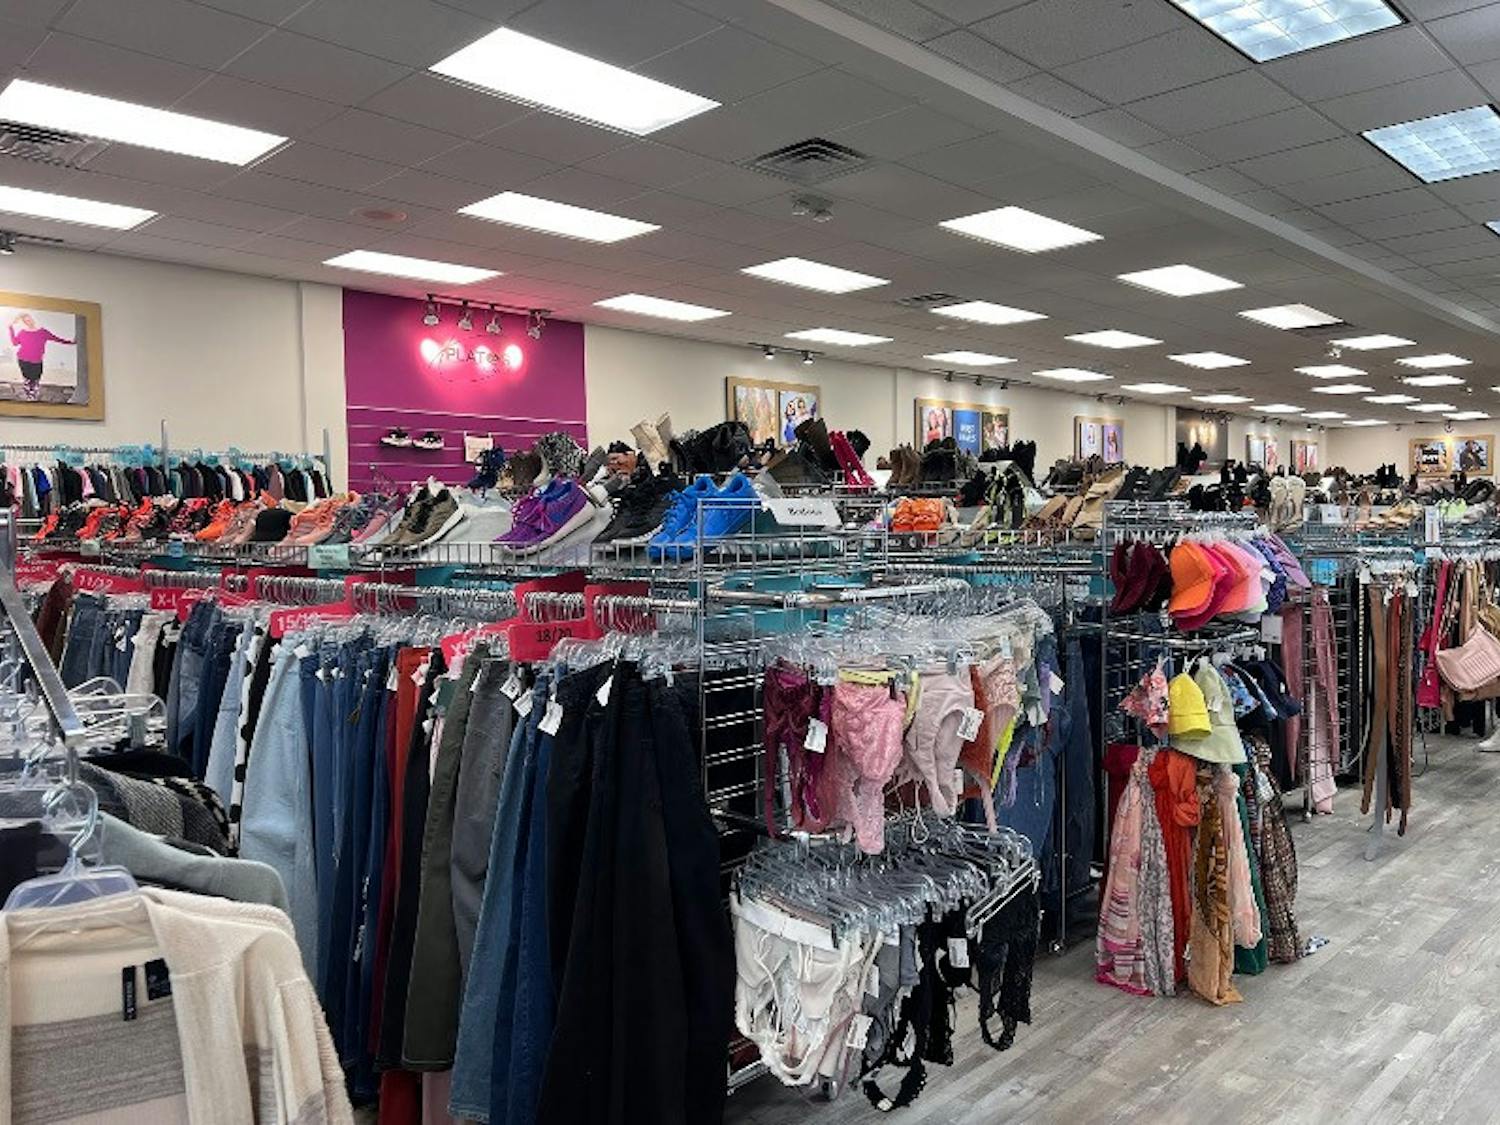 Thrift stores, such as Plato’s Closet which is featured, were initially designed to benefit low-income communities, but have gained more traction among Gen Z in recent years (Photo courtesy of Riley Eisenbeil).